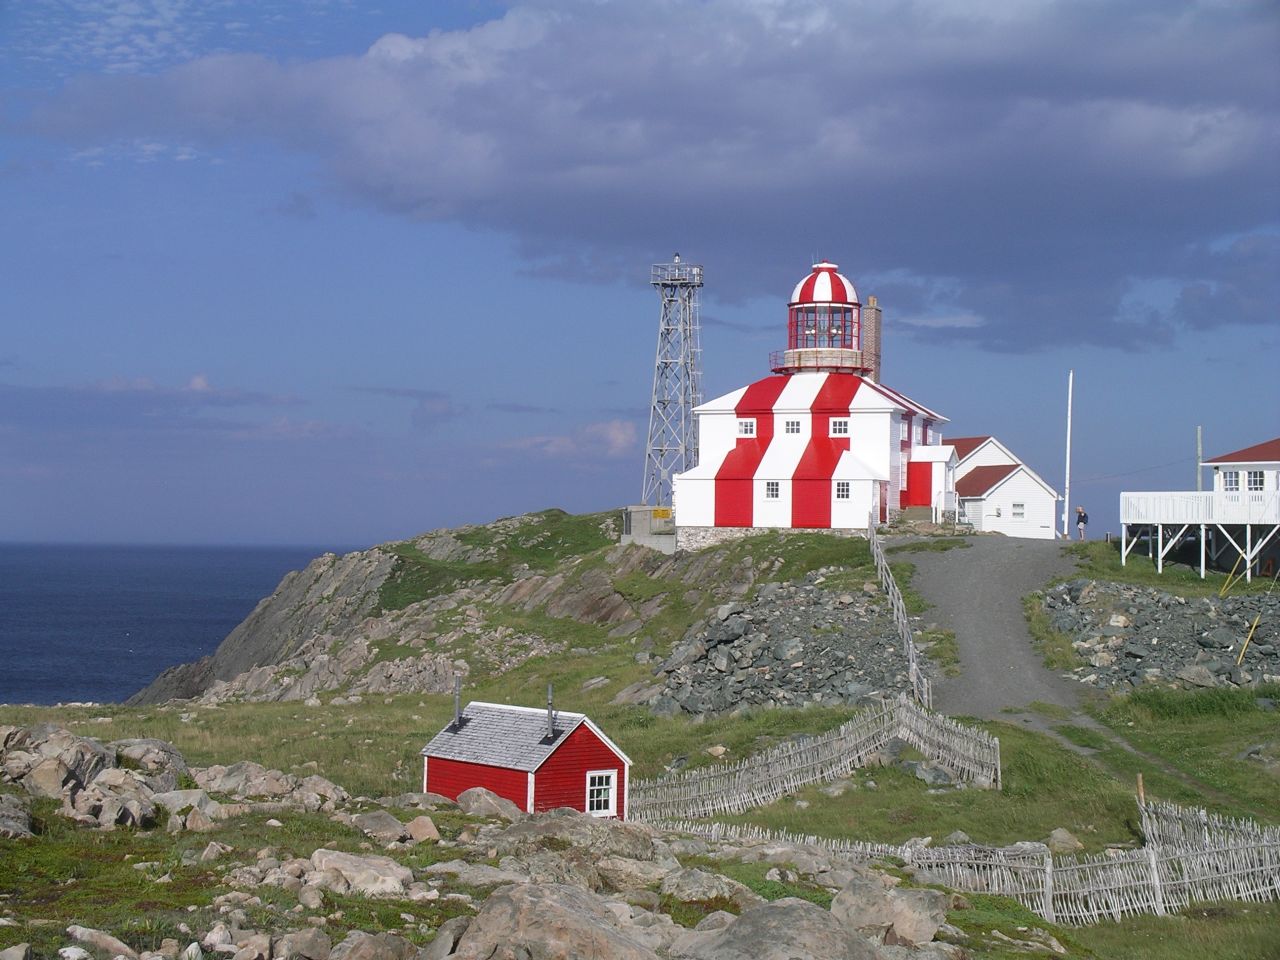 Cape Bonavista Lighthouse in Newfoundland radiated its light from 1843 to 1962, when it was replaced by an electric light on a nearby steel tower. The lighthouse was converted into a museum, preserving maritime artifacts from the late 1800s.